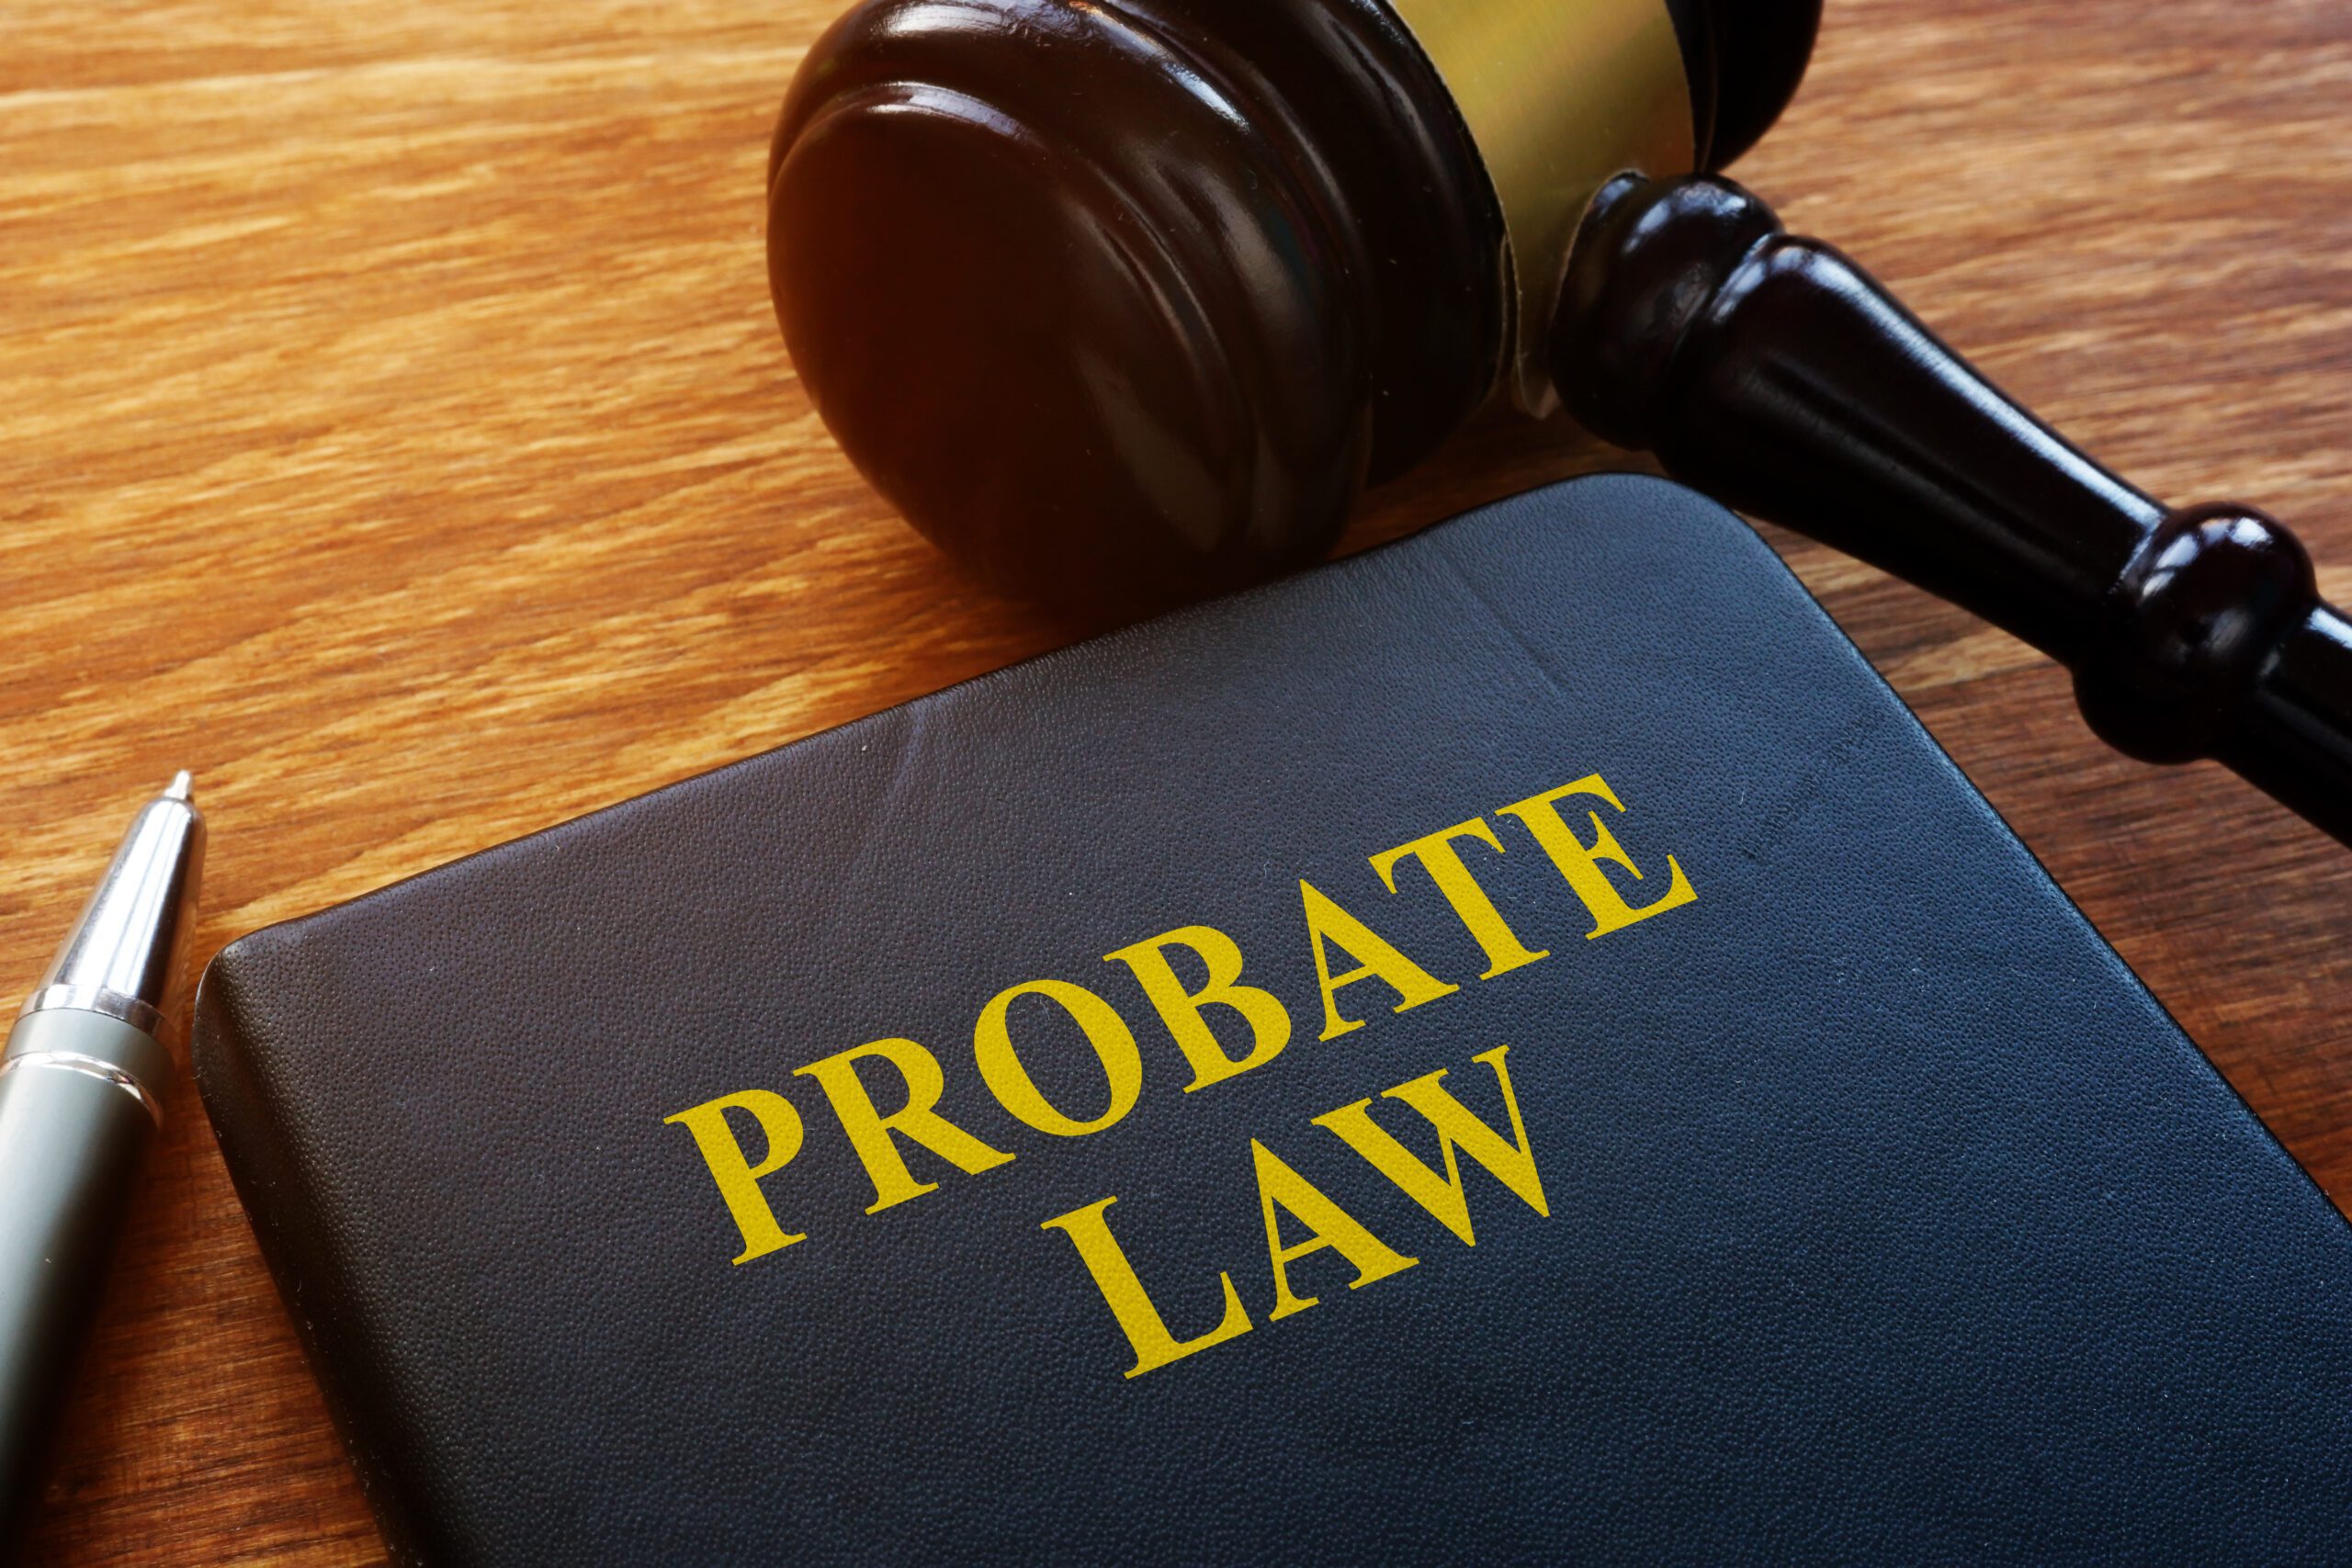 a navy blue book with the words “probate law” written on it in yellow, with a pen and a gavel on either side of the book